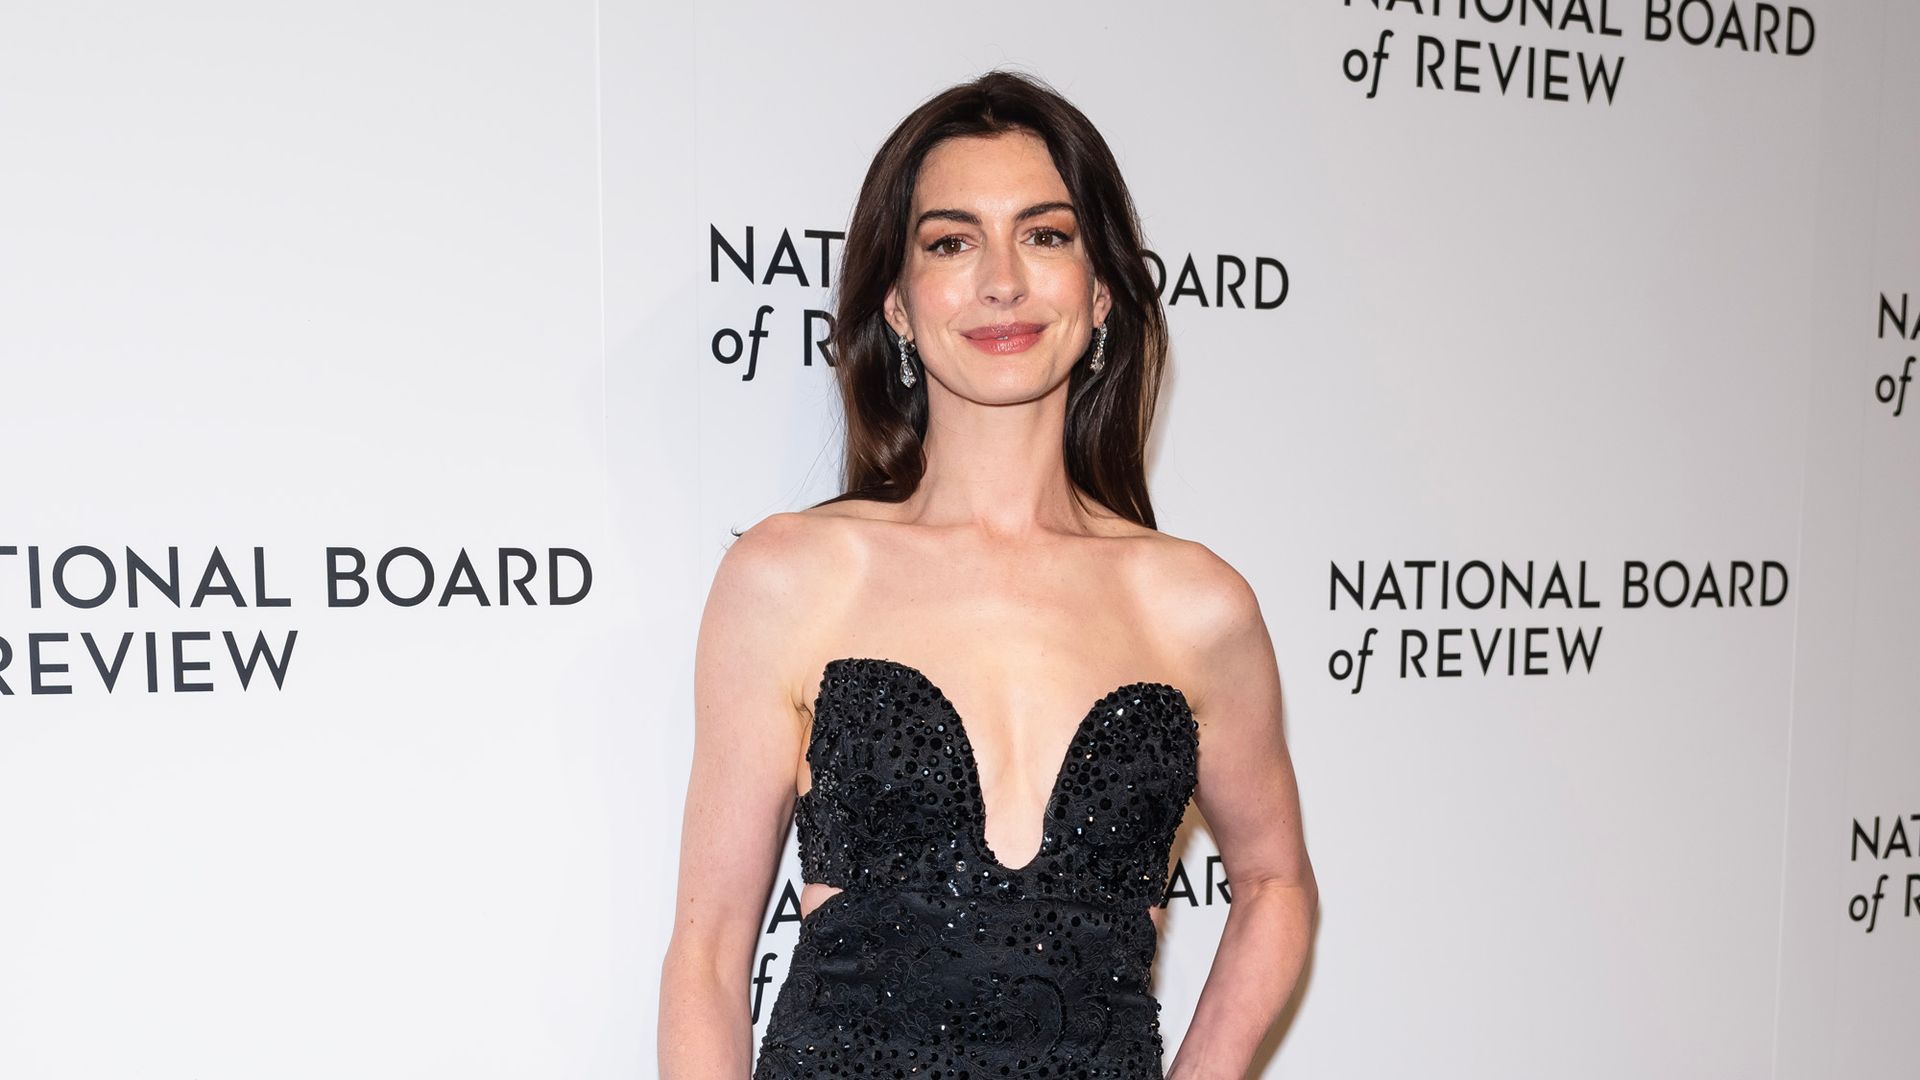 Anne Hathaway and Jessica Chastain lead the best dressed at National Board Of Review Awards Gala